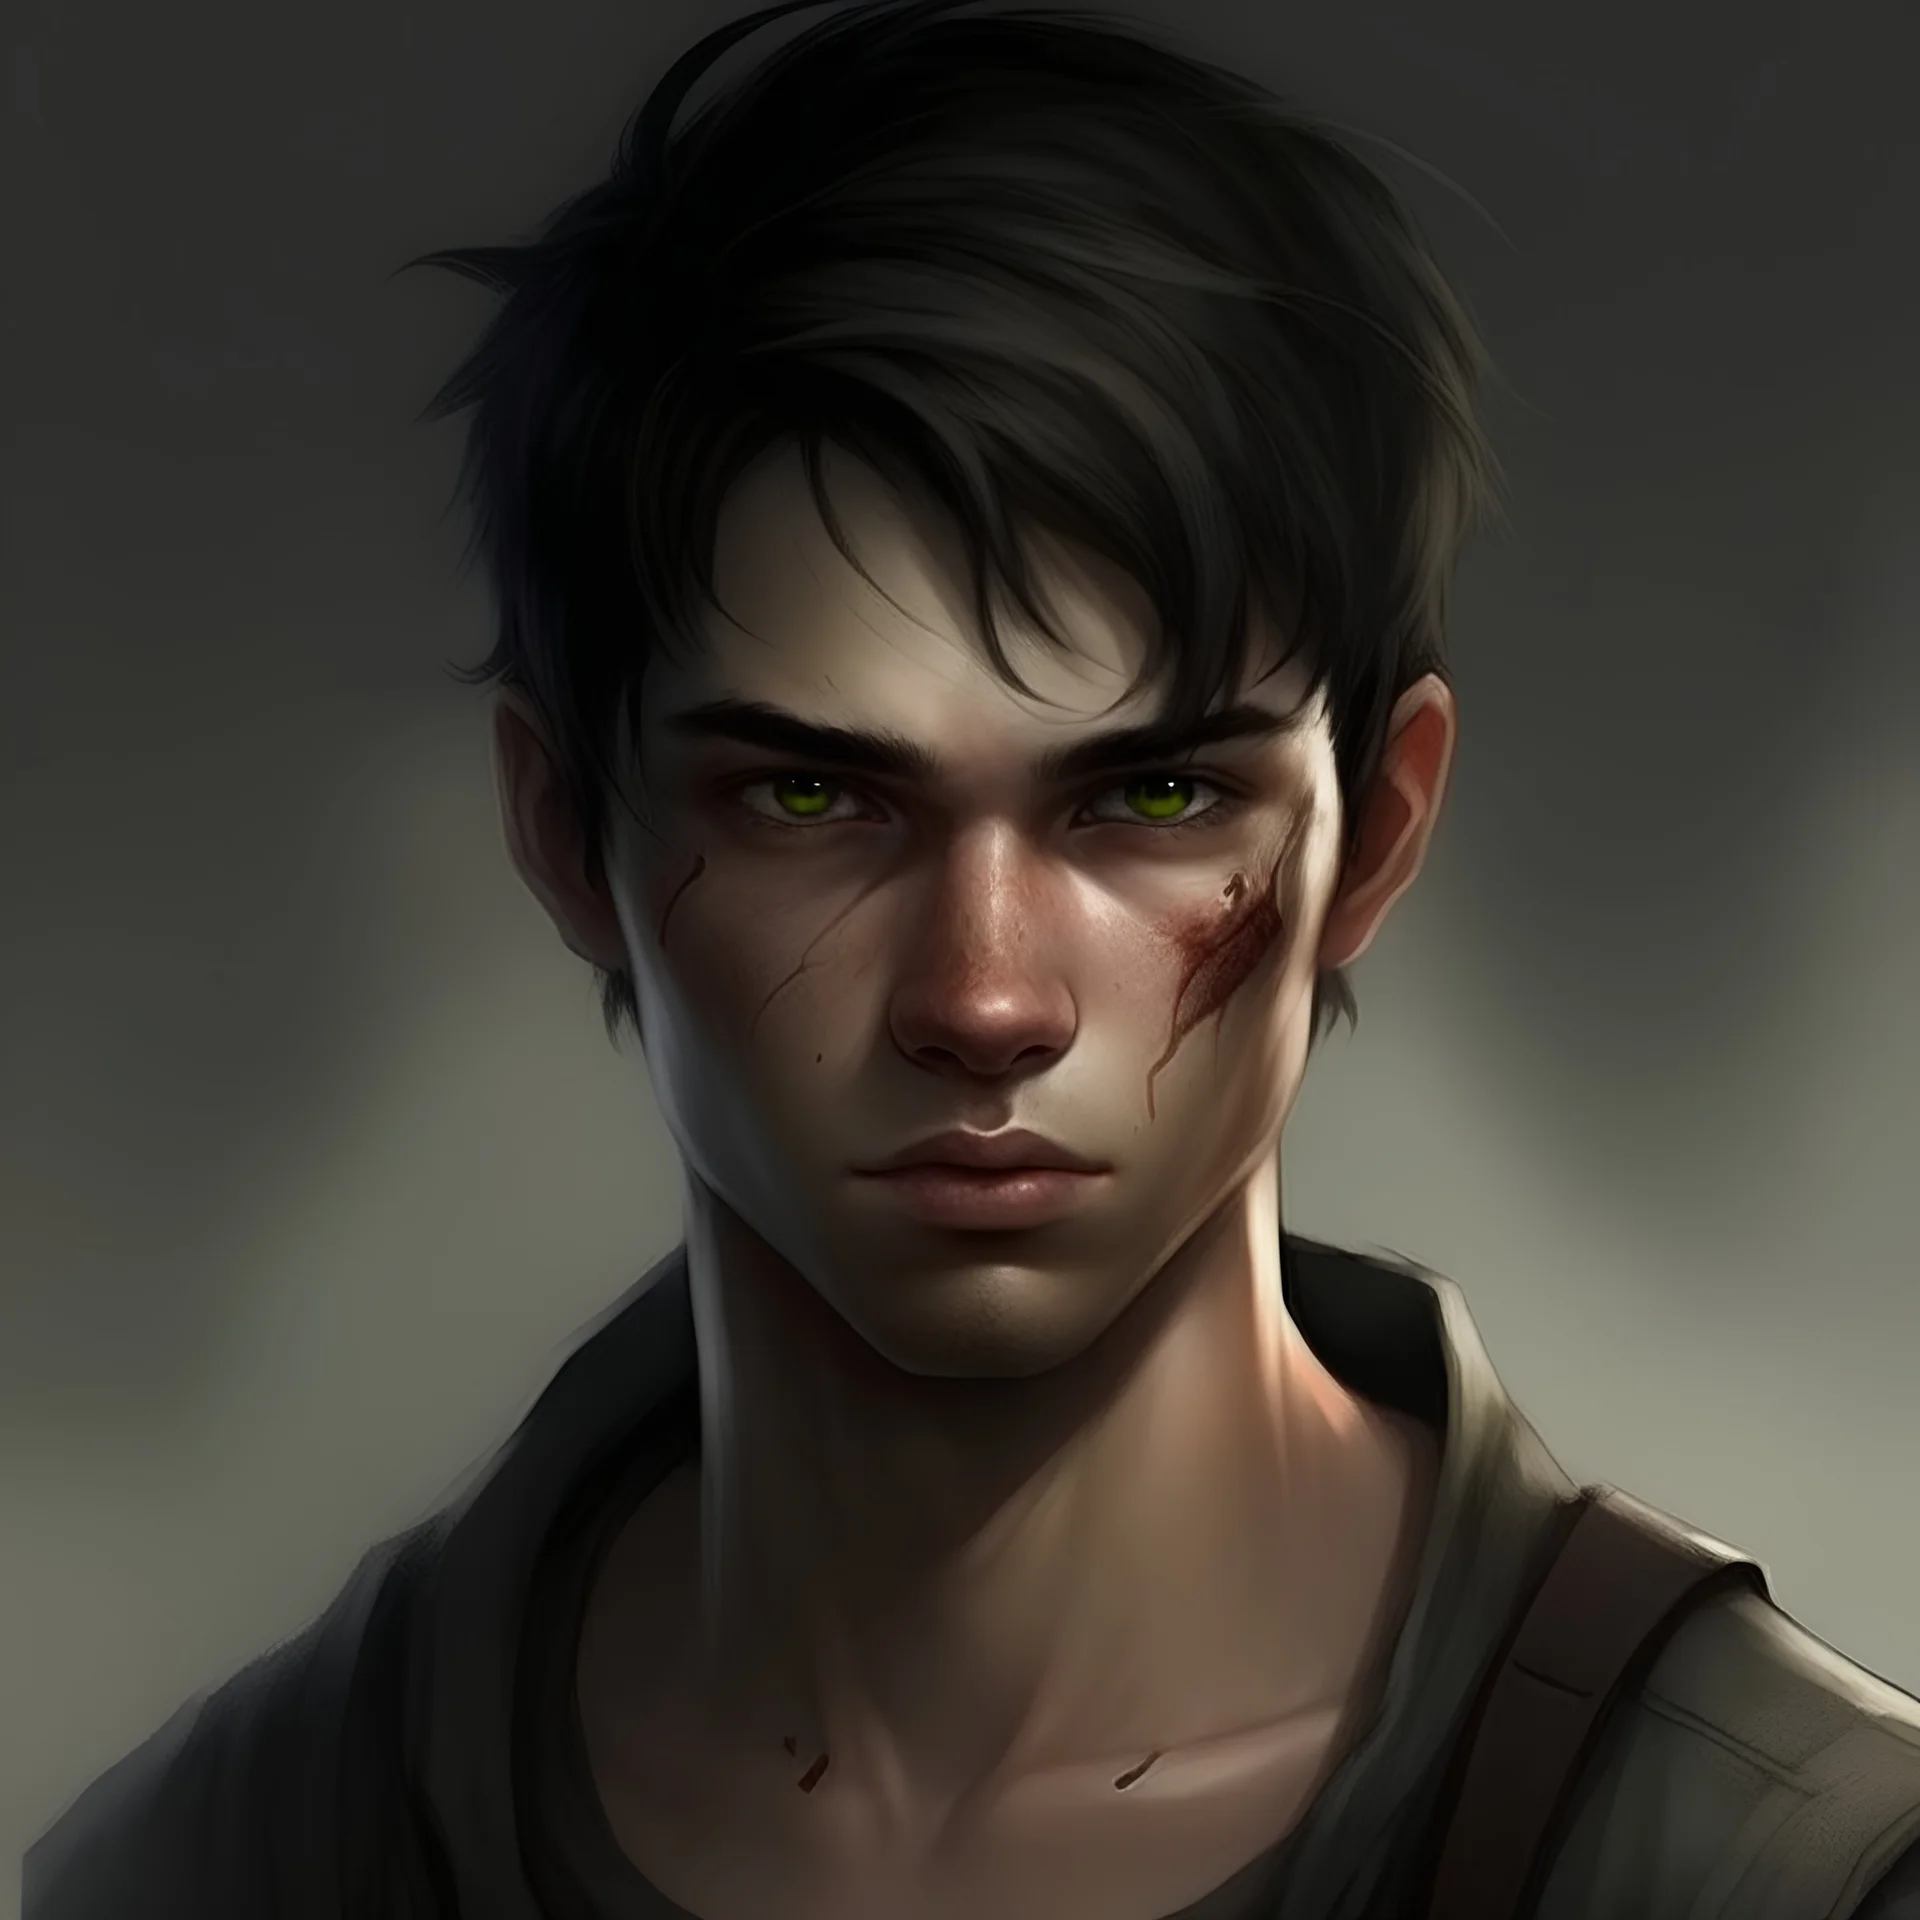 A 19 year old male survivor of the apocalypse. He has dark hair